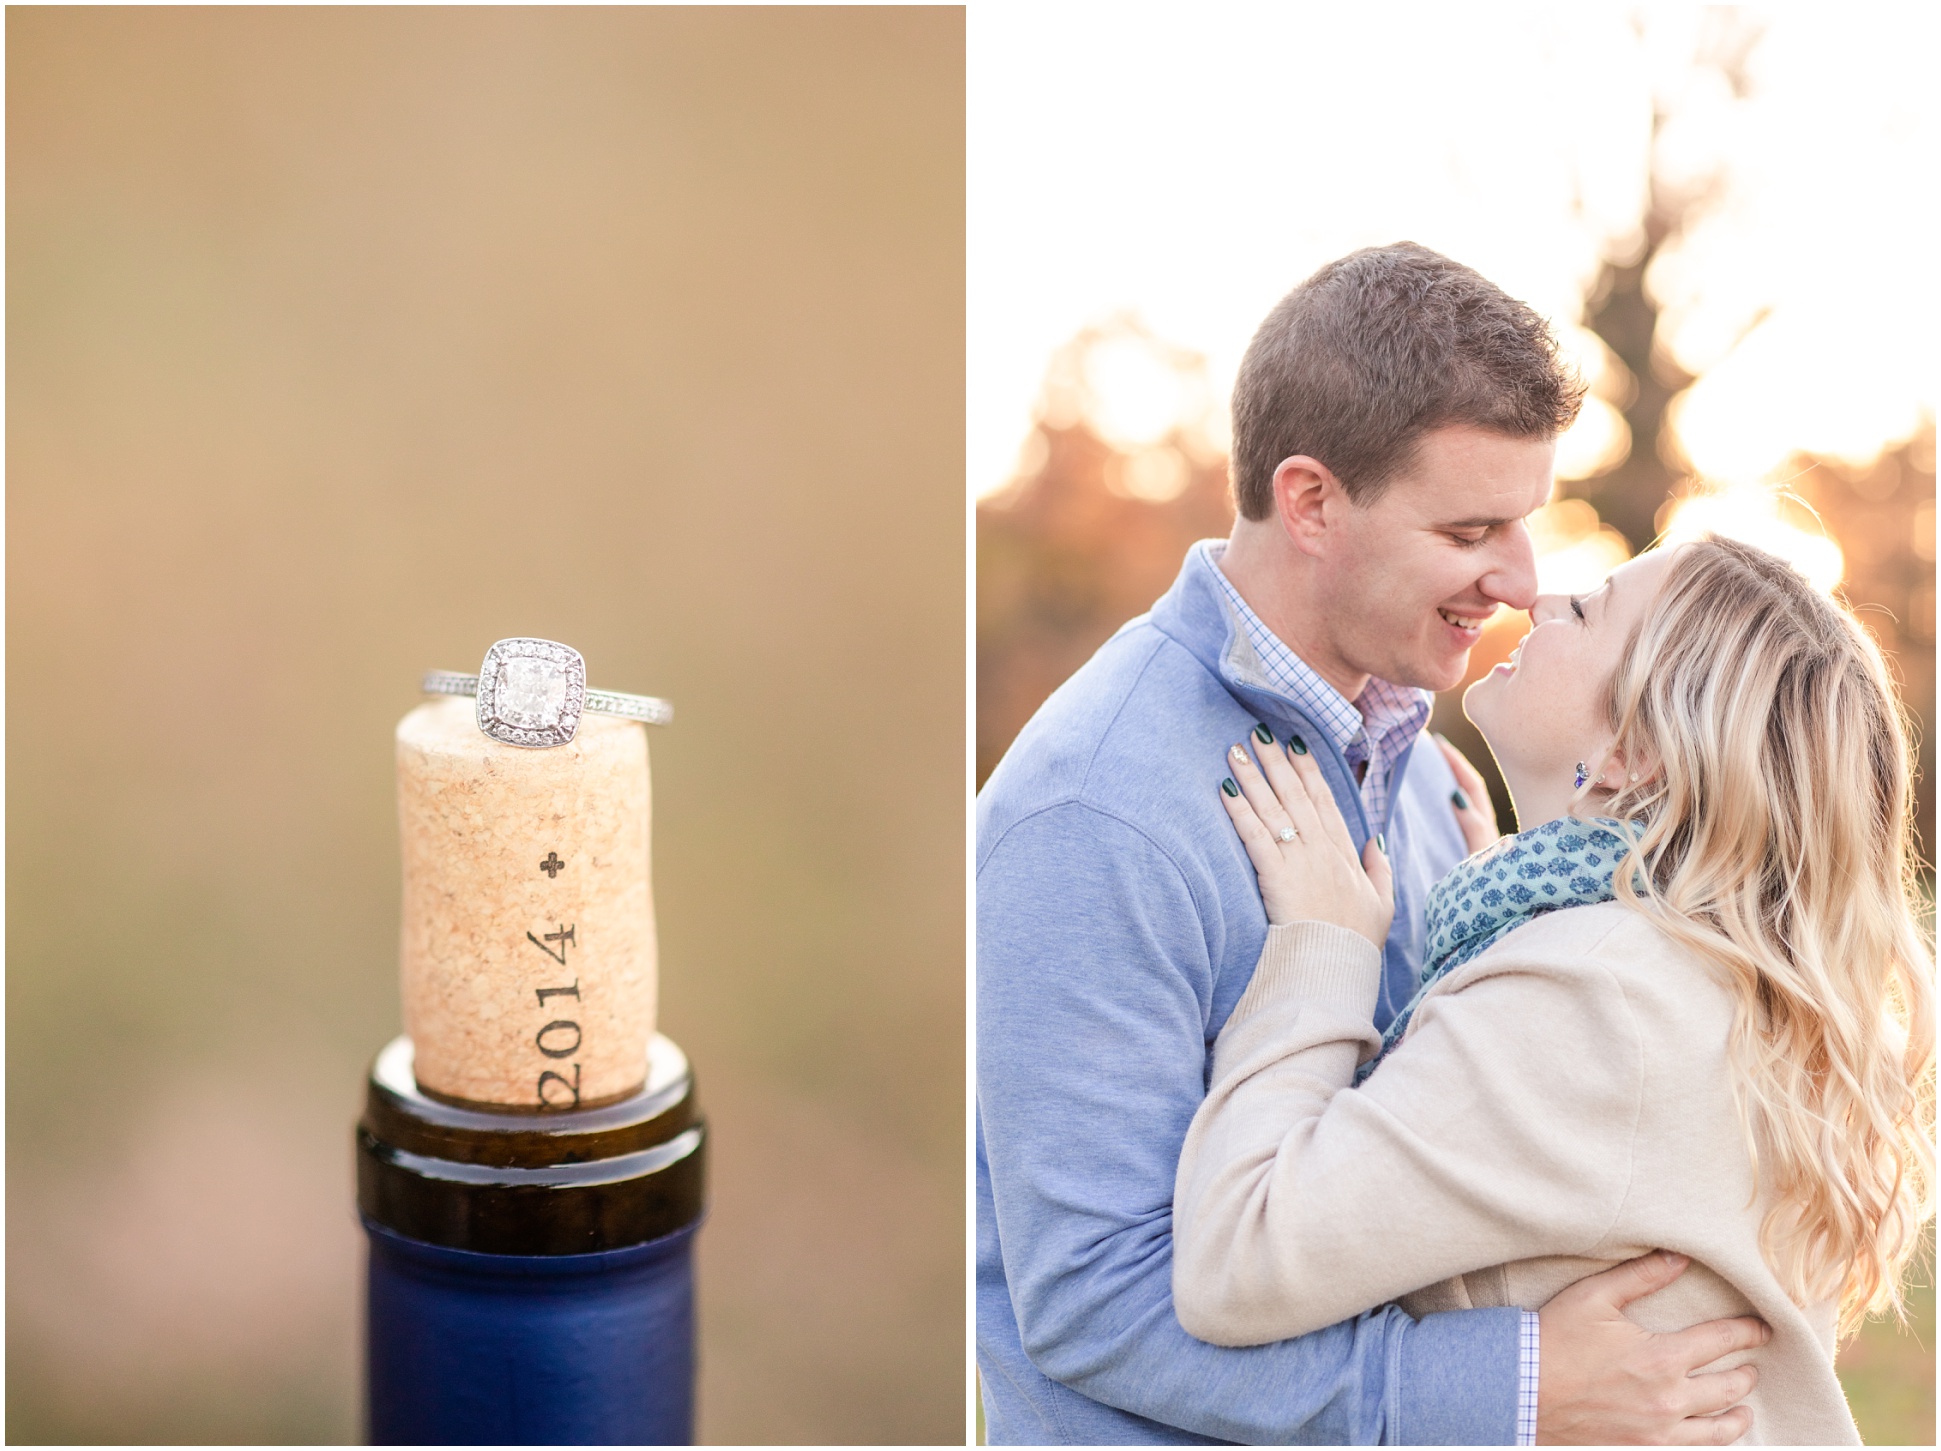 Diamond engagement ring on wine bottle cork; Couple holding each other in their arms and gazing in each other's eyes